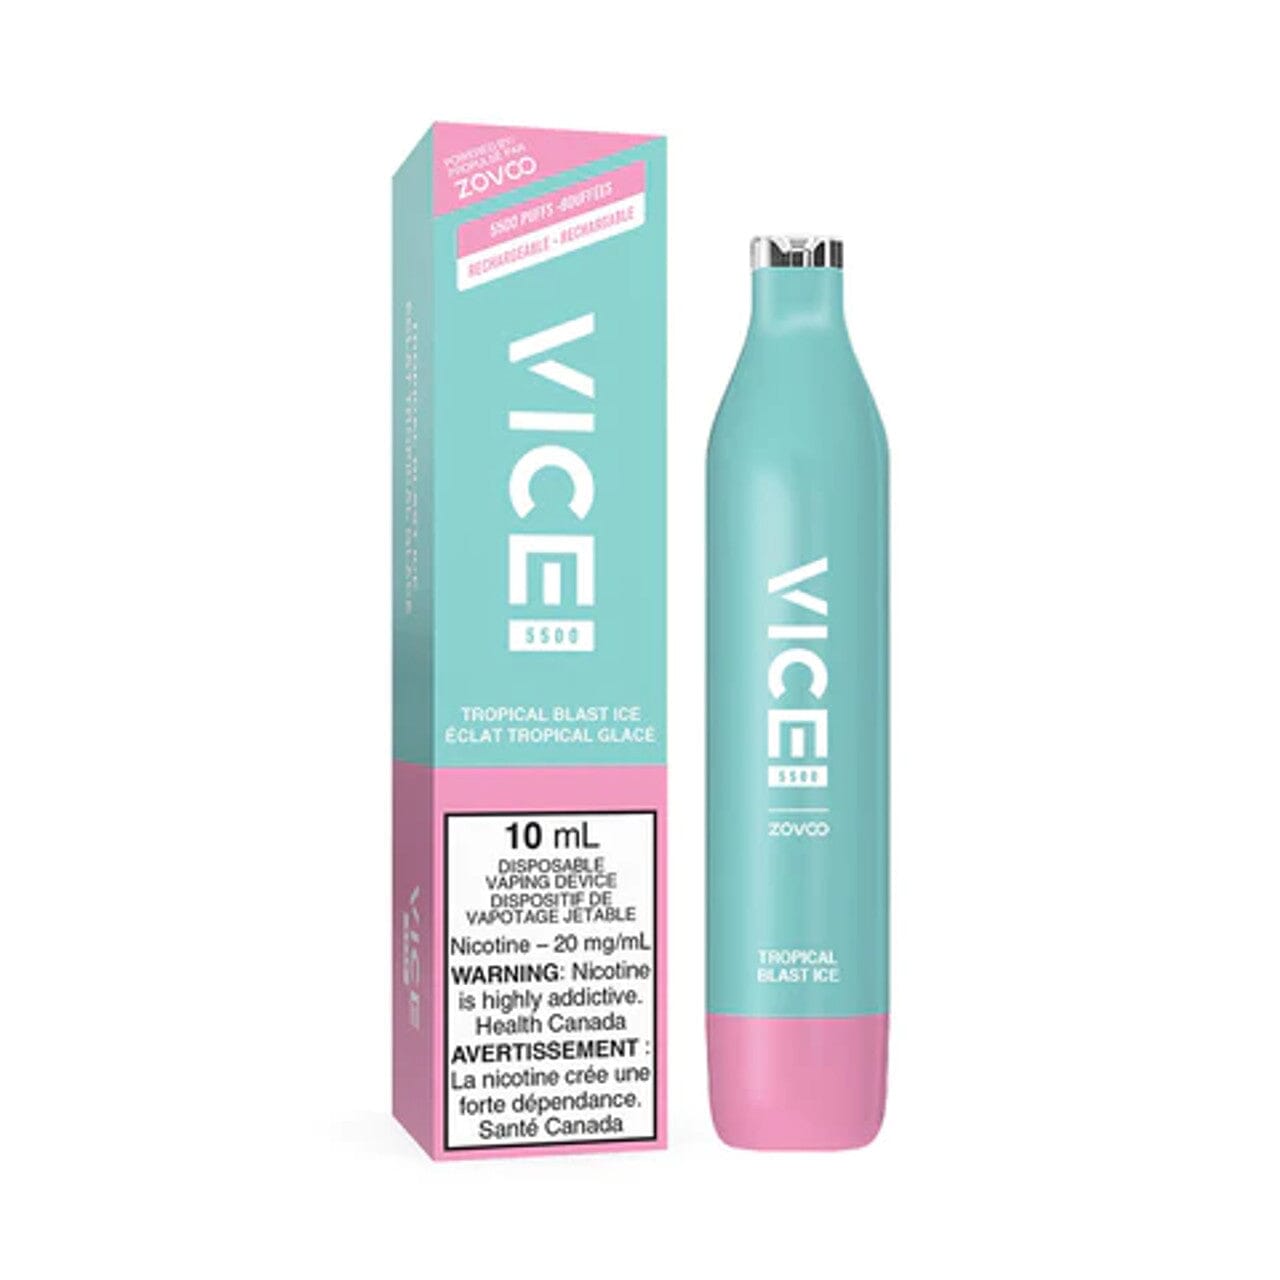 Tropical Blast Ice - Vice 5500 Disposable Vice 